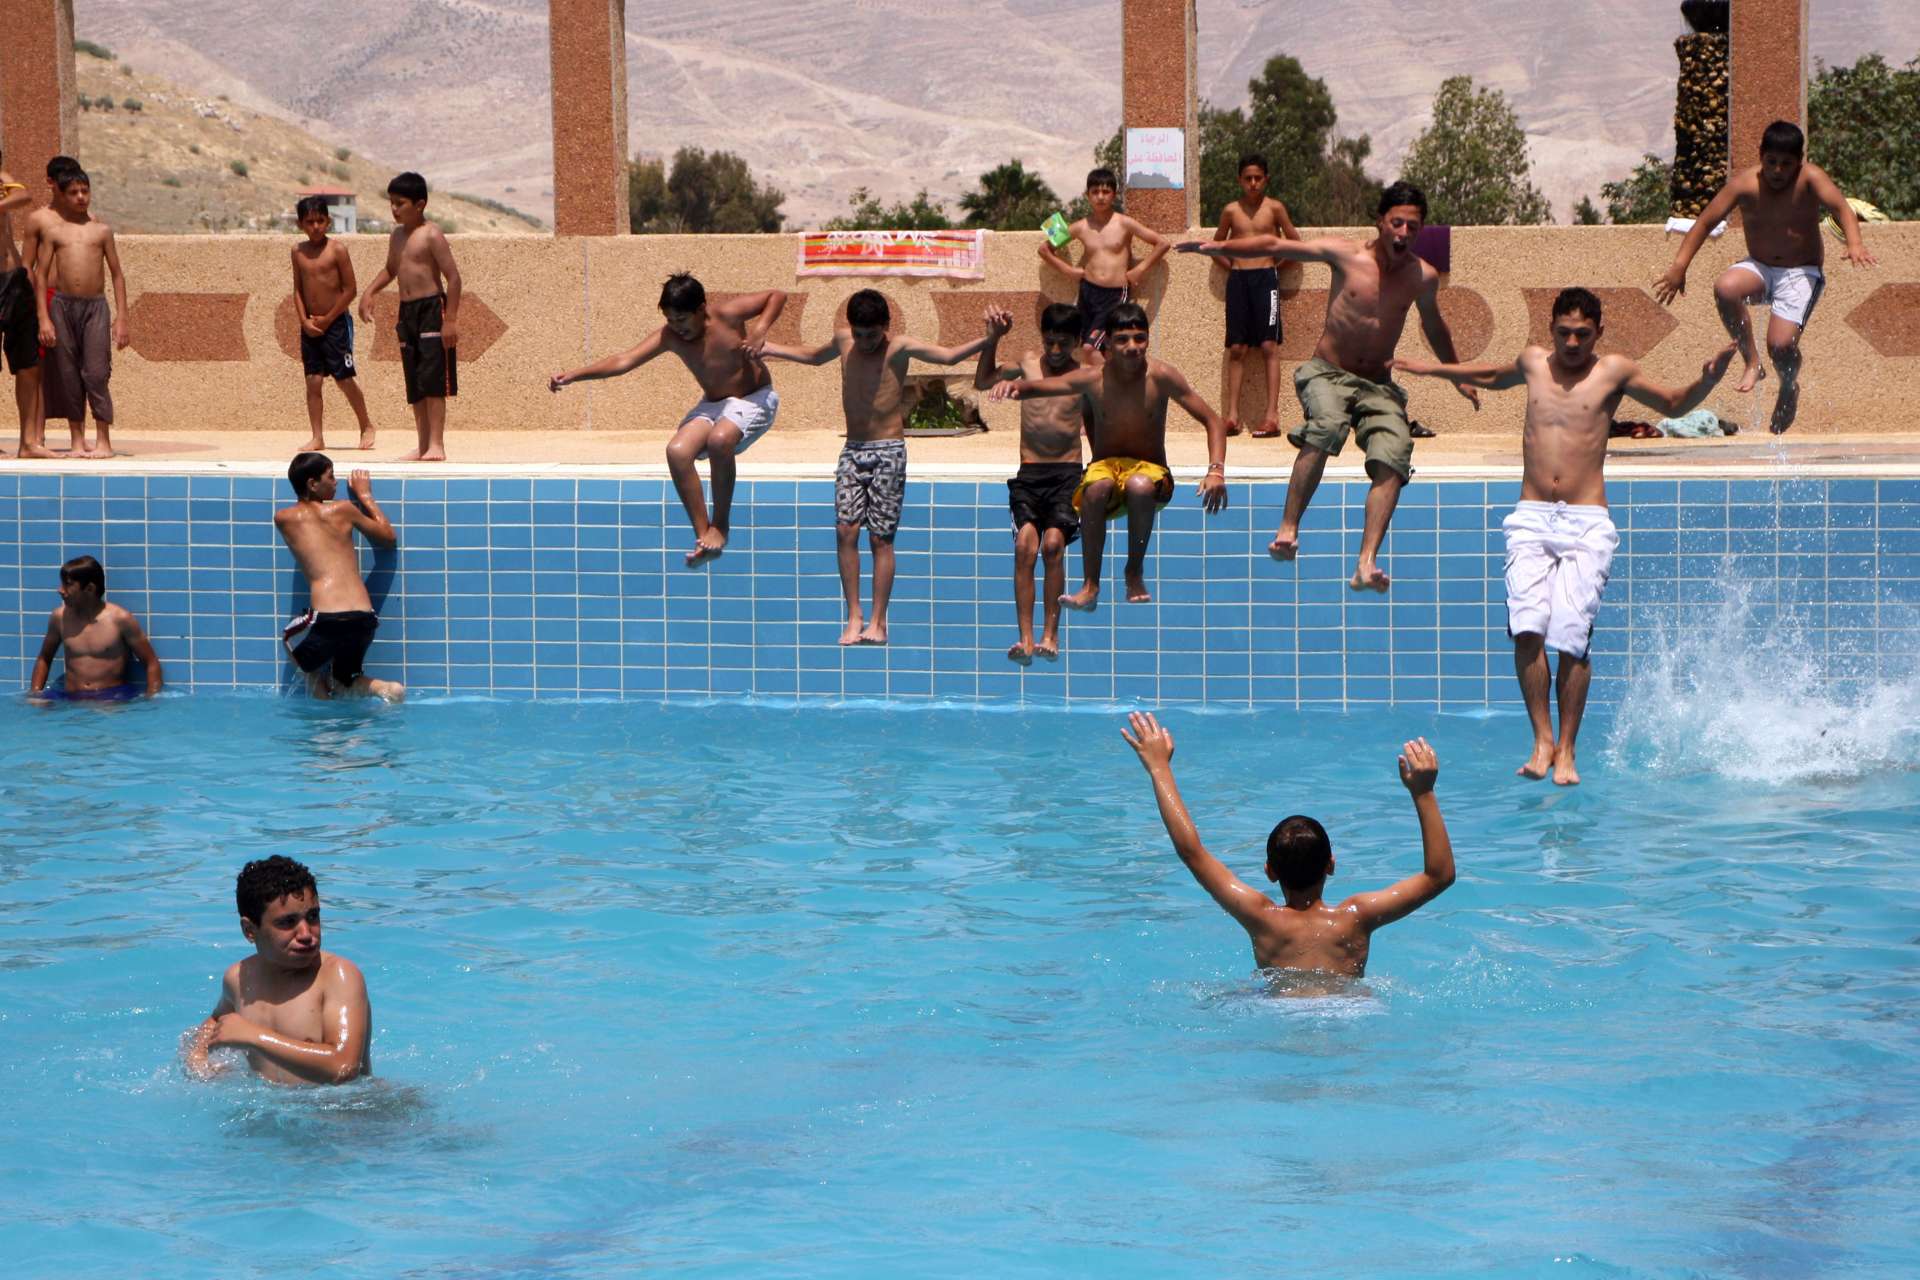 Youths cools off in a swimming pool in Bathan, near Nablus, in a photo taken by Nasser Ishtayer in June 2010 (AP)